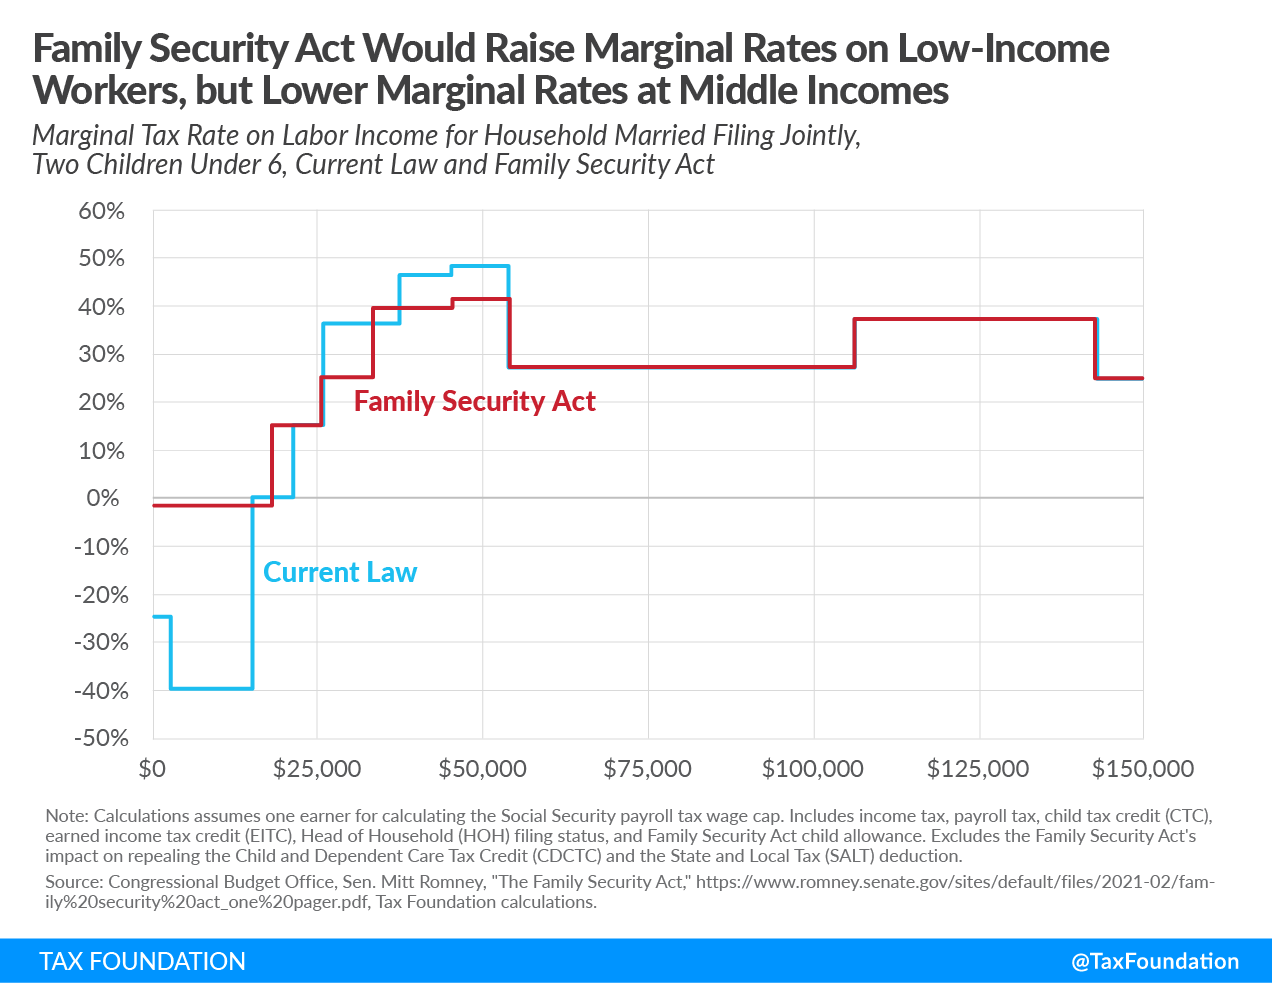 Mitt Romney Family Security Act Would raise marginal rates on low-income workers, but lower marginal rates at higher incomes. Mitt Romney Child Tax Allowance